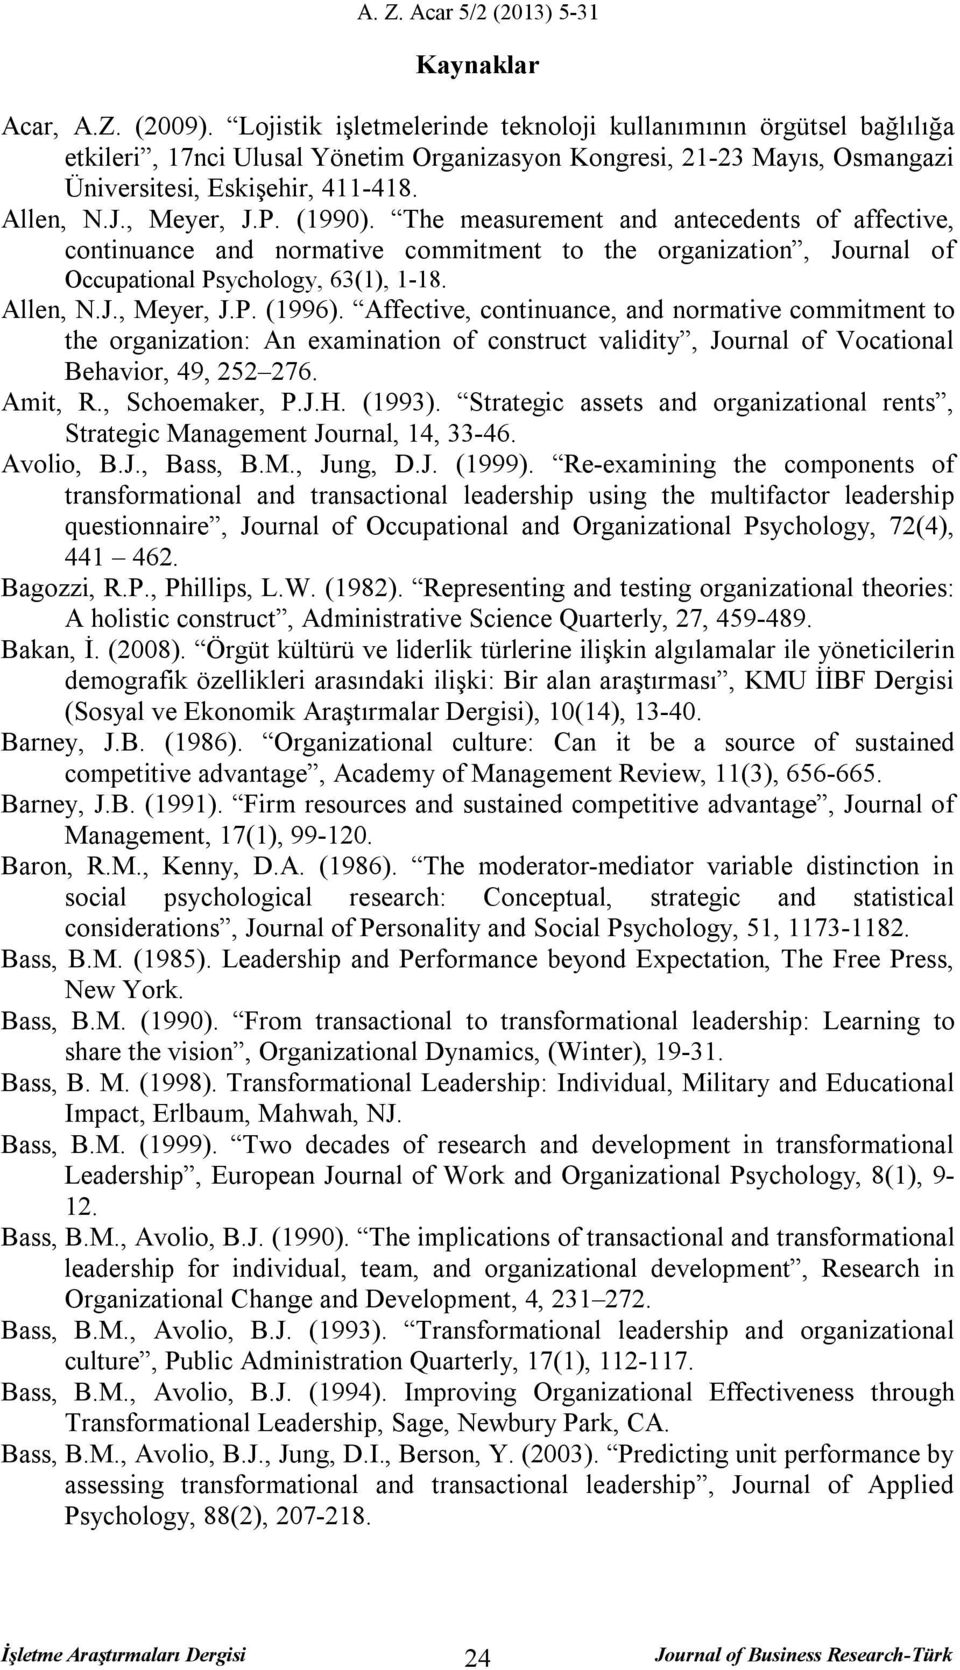 P. (1990). The measurement and antecedents of affective, continuance and normative commitment to the organization, Journal of Occupational Psychology, 63(1), 1-18. Allen, N.J., Meyer, J.P. (1996).